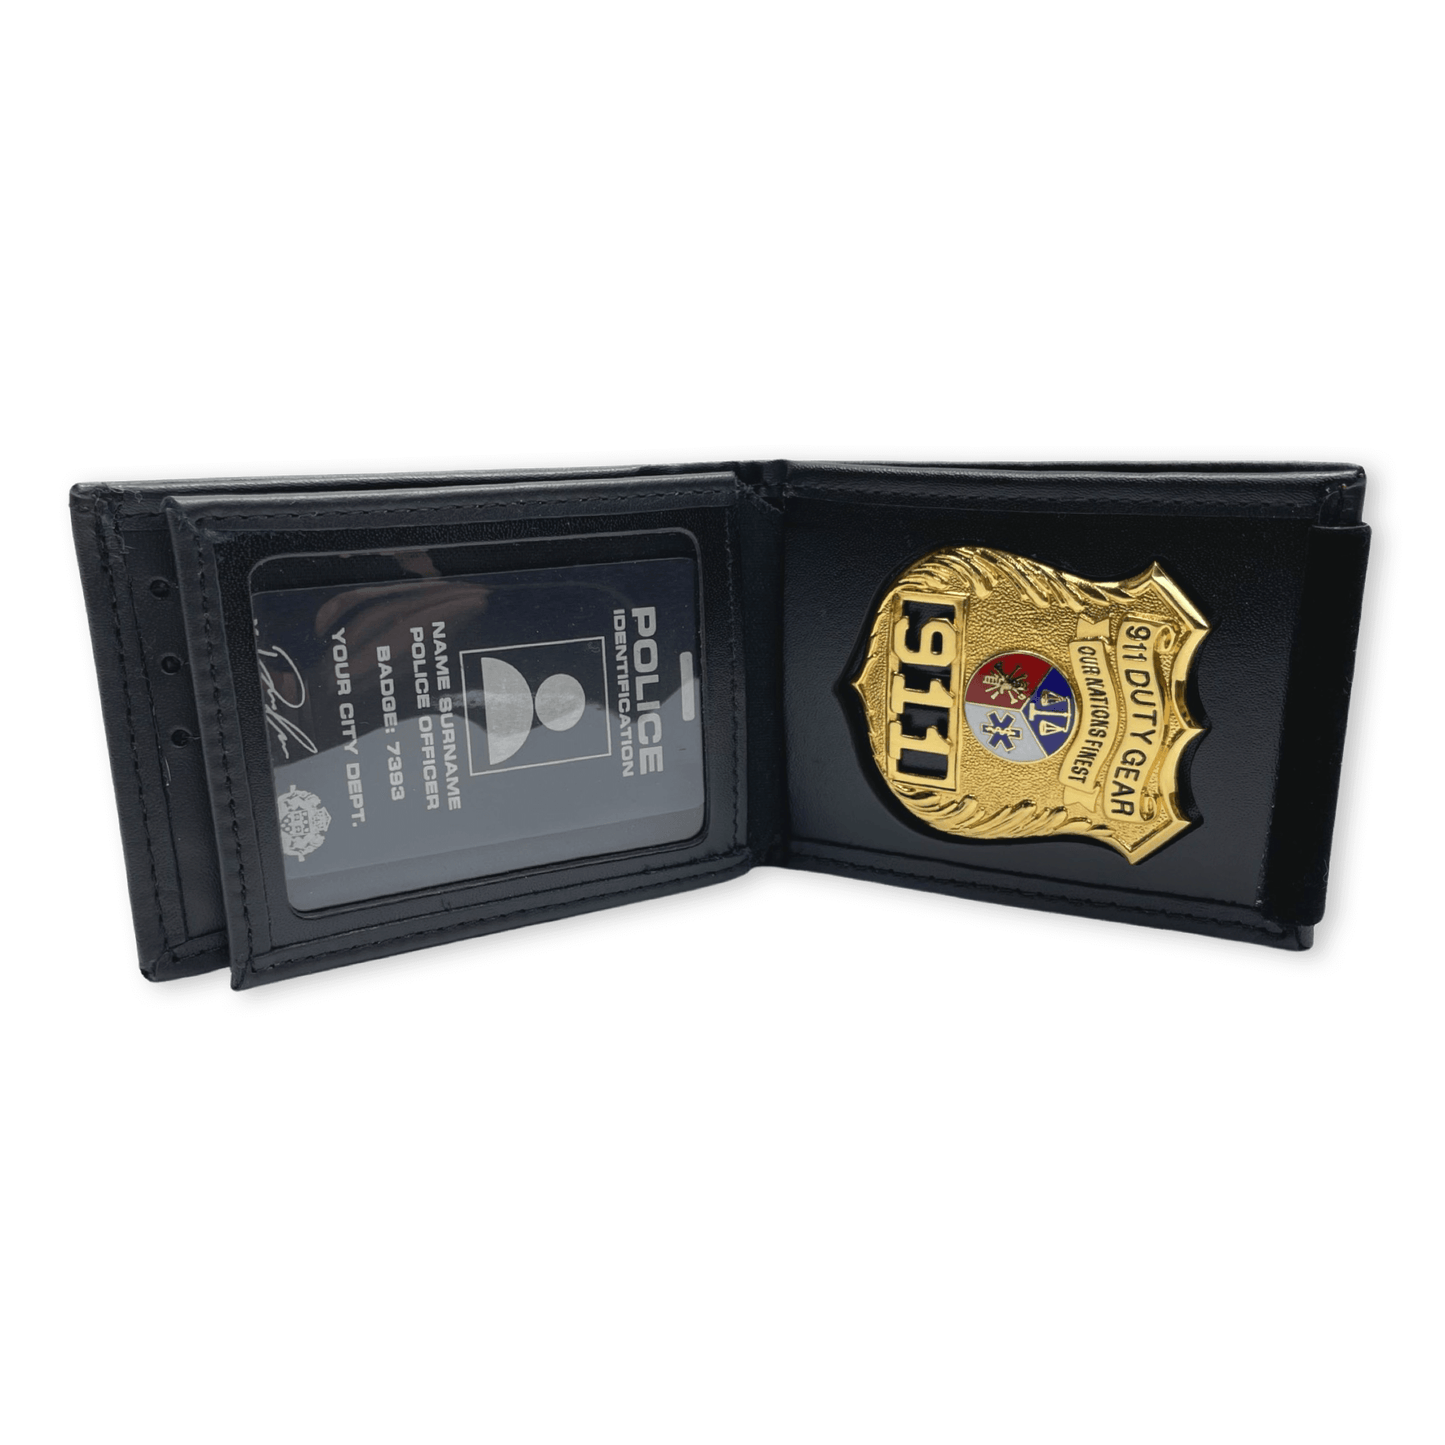 Parliamentary Protective Service PPS-SPP Hidden Badge Wallet